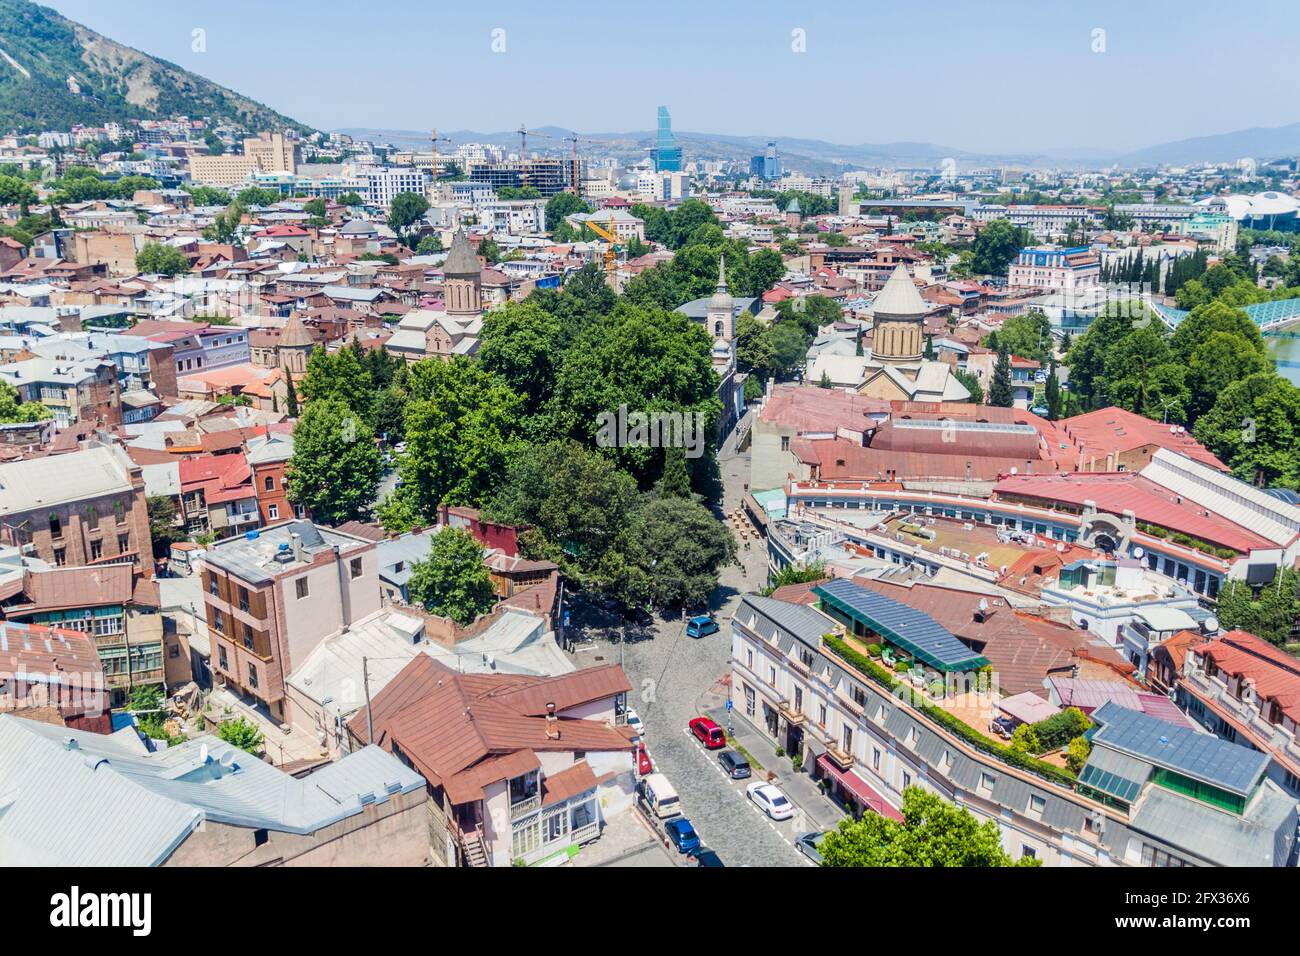 Aerial view of the Old town of Tbilisi, Georgia Stock Photo